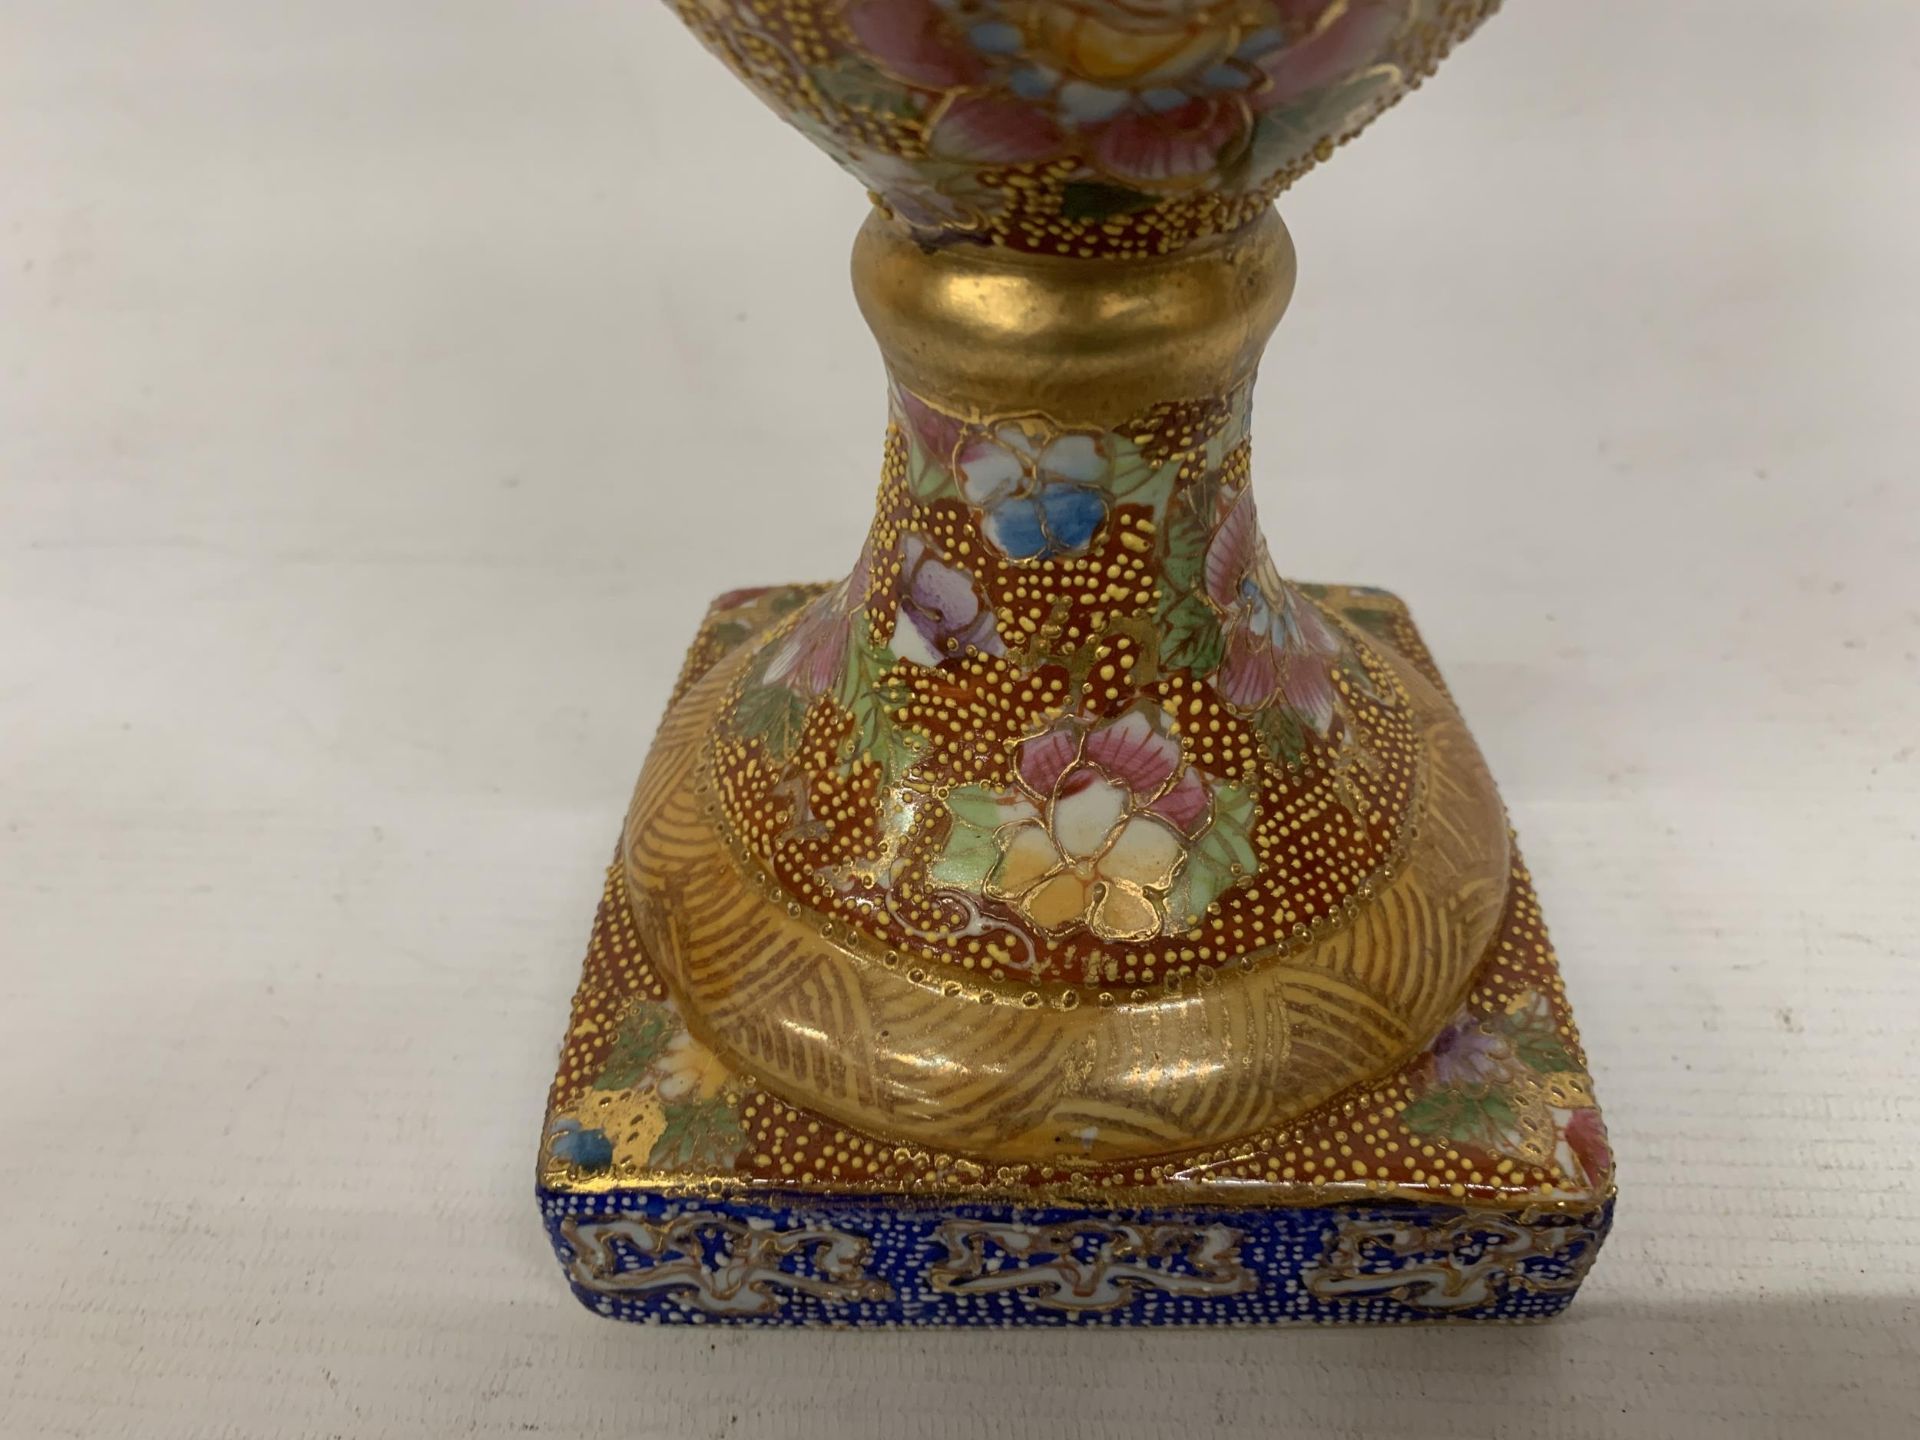 A LARGE DECORATIVE HAND PAINTED JAPANESE TWIN HANDLED LIDDED VASE, HEIGHT 56CM - Image 5 of 8